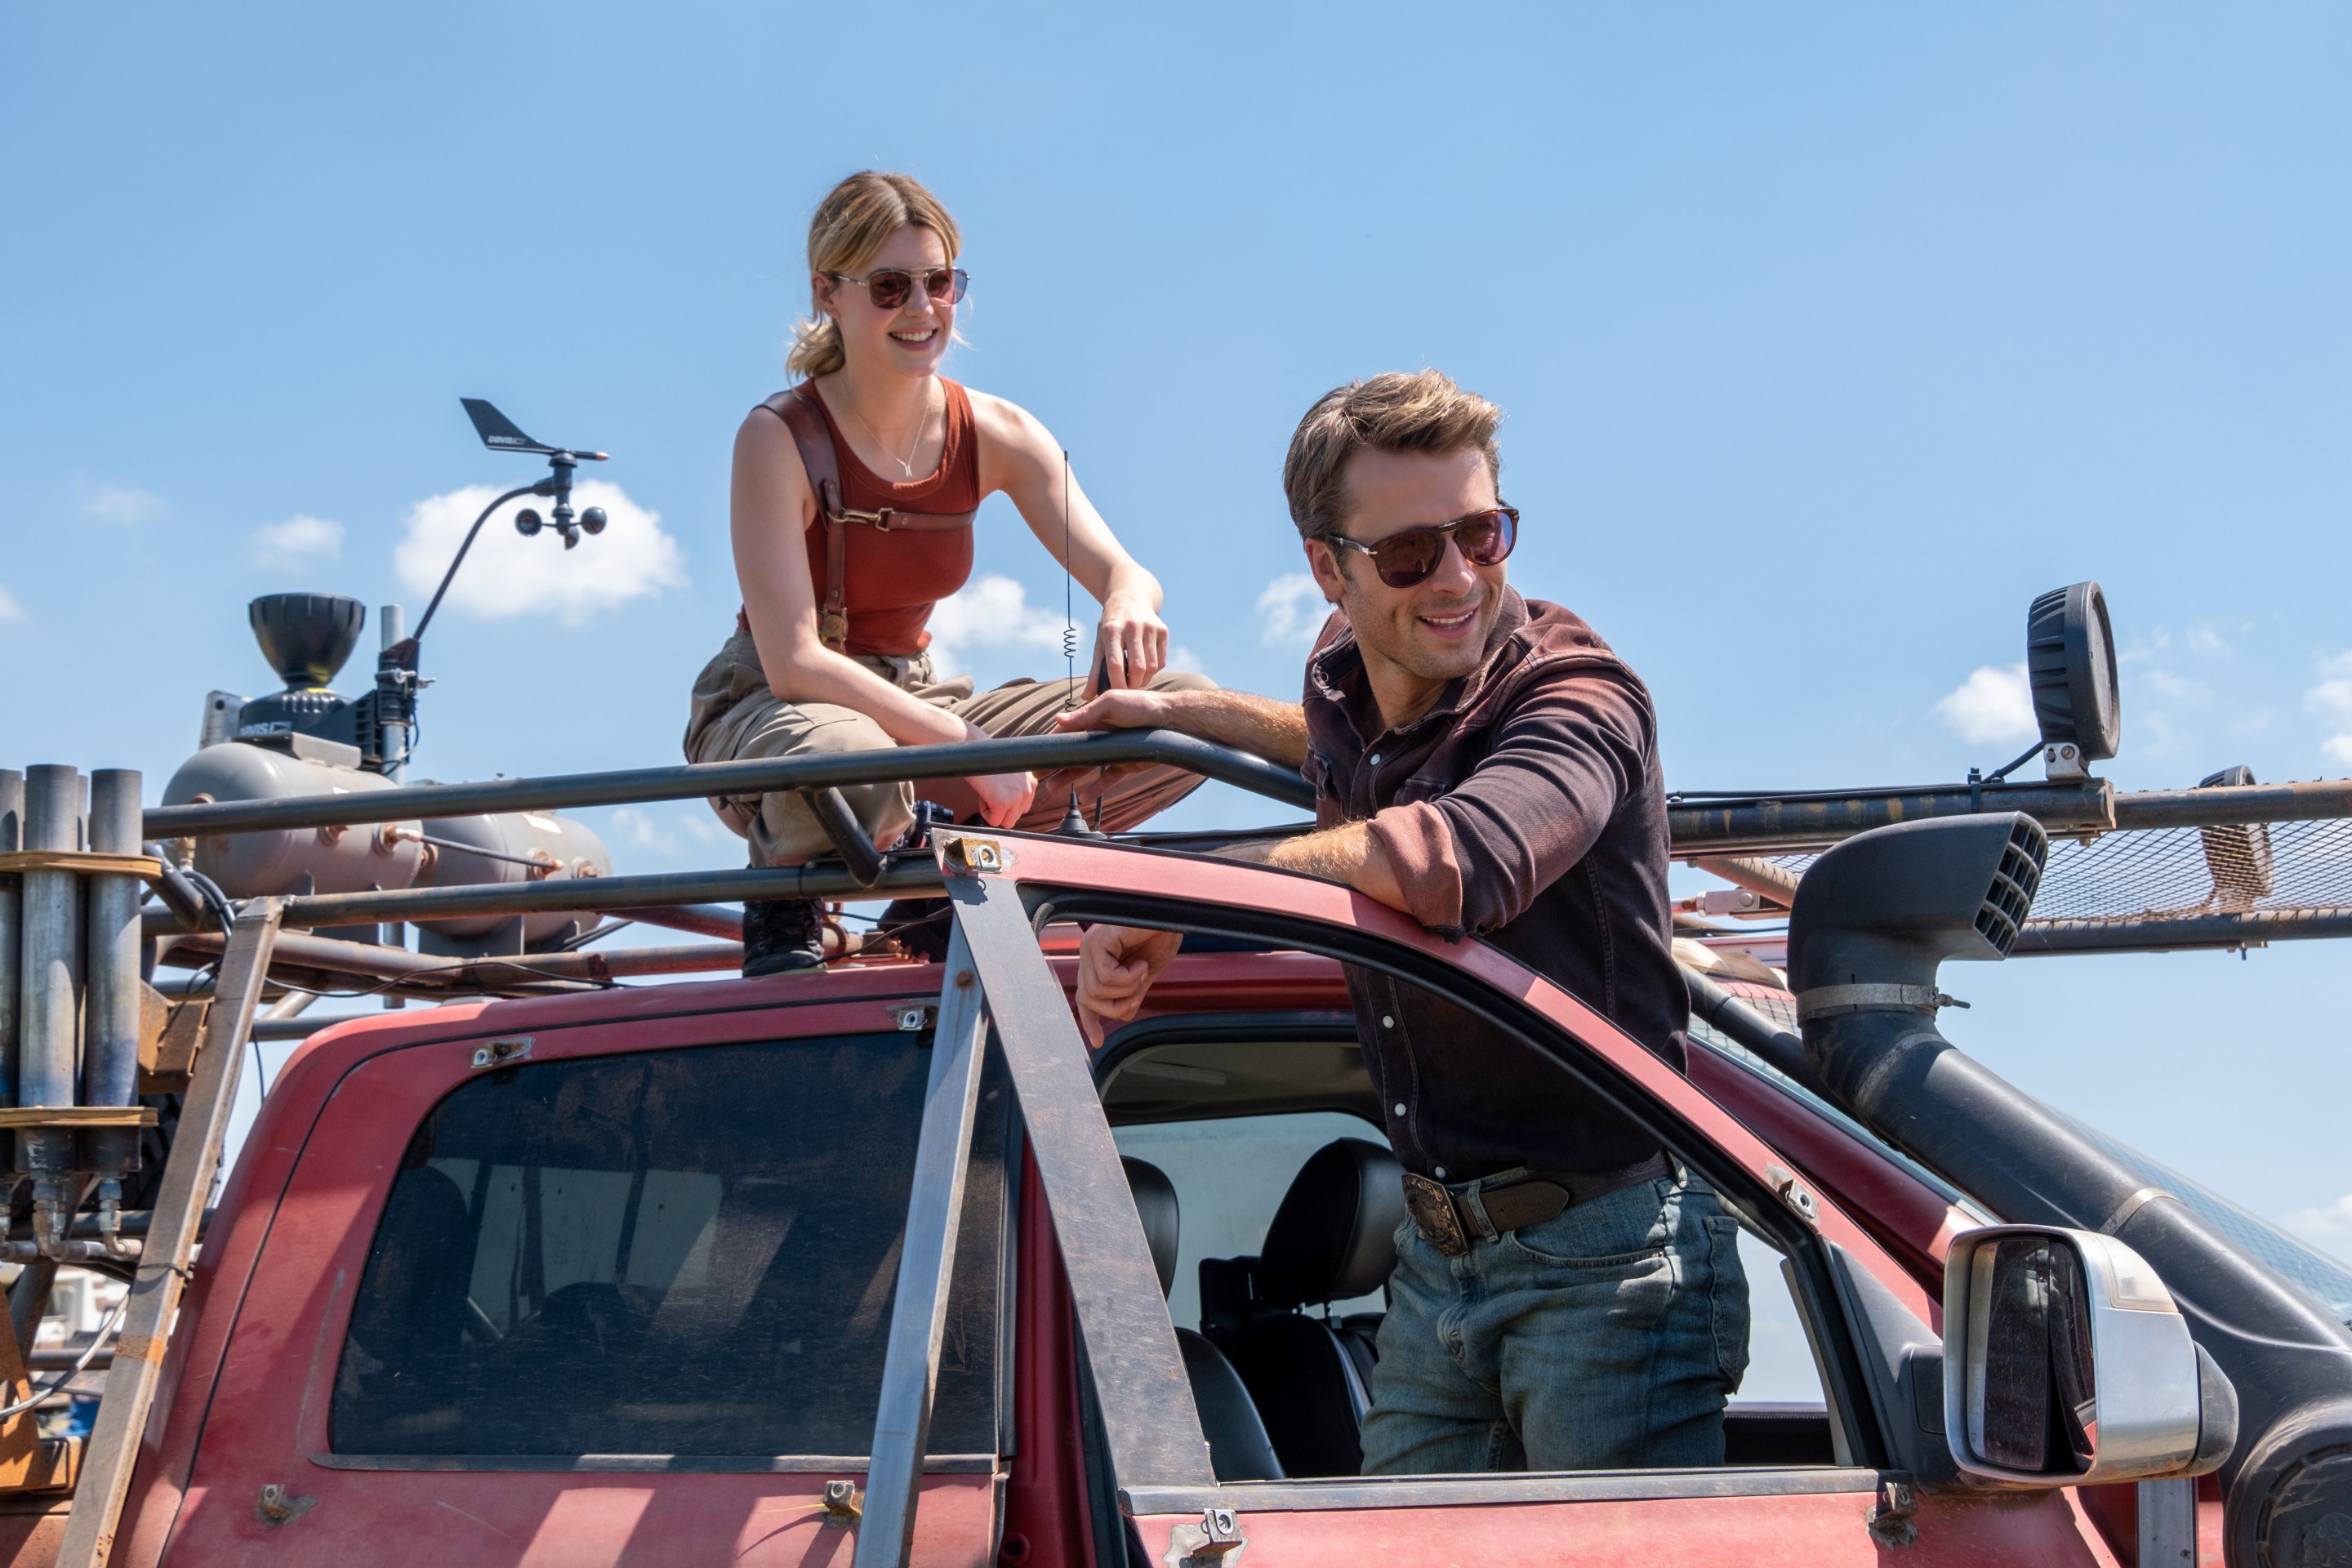 (from left) Kate (Daisy Edgar-Jones) and Tyler (Glen Powell) in Twisters, directed by Lee Isaac Chung.